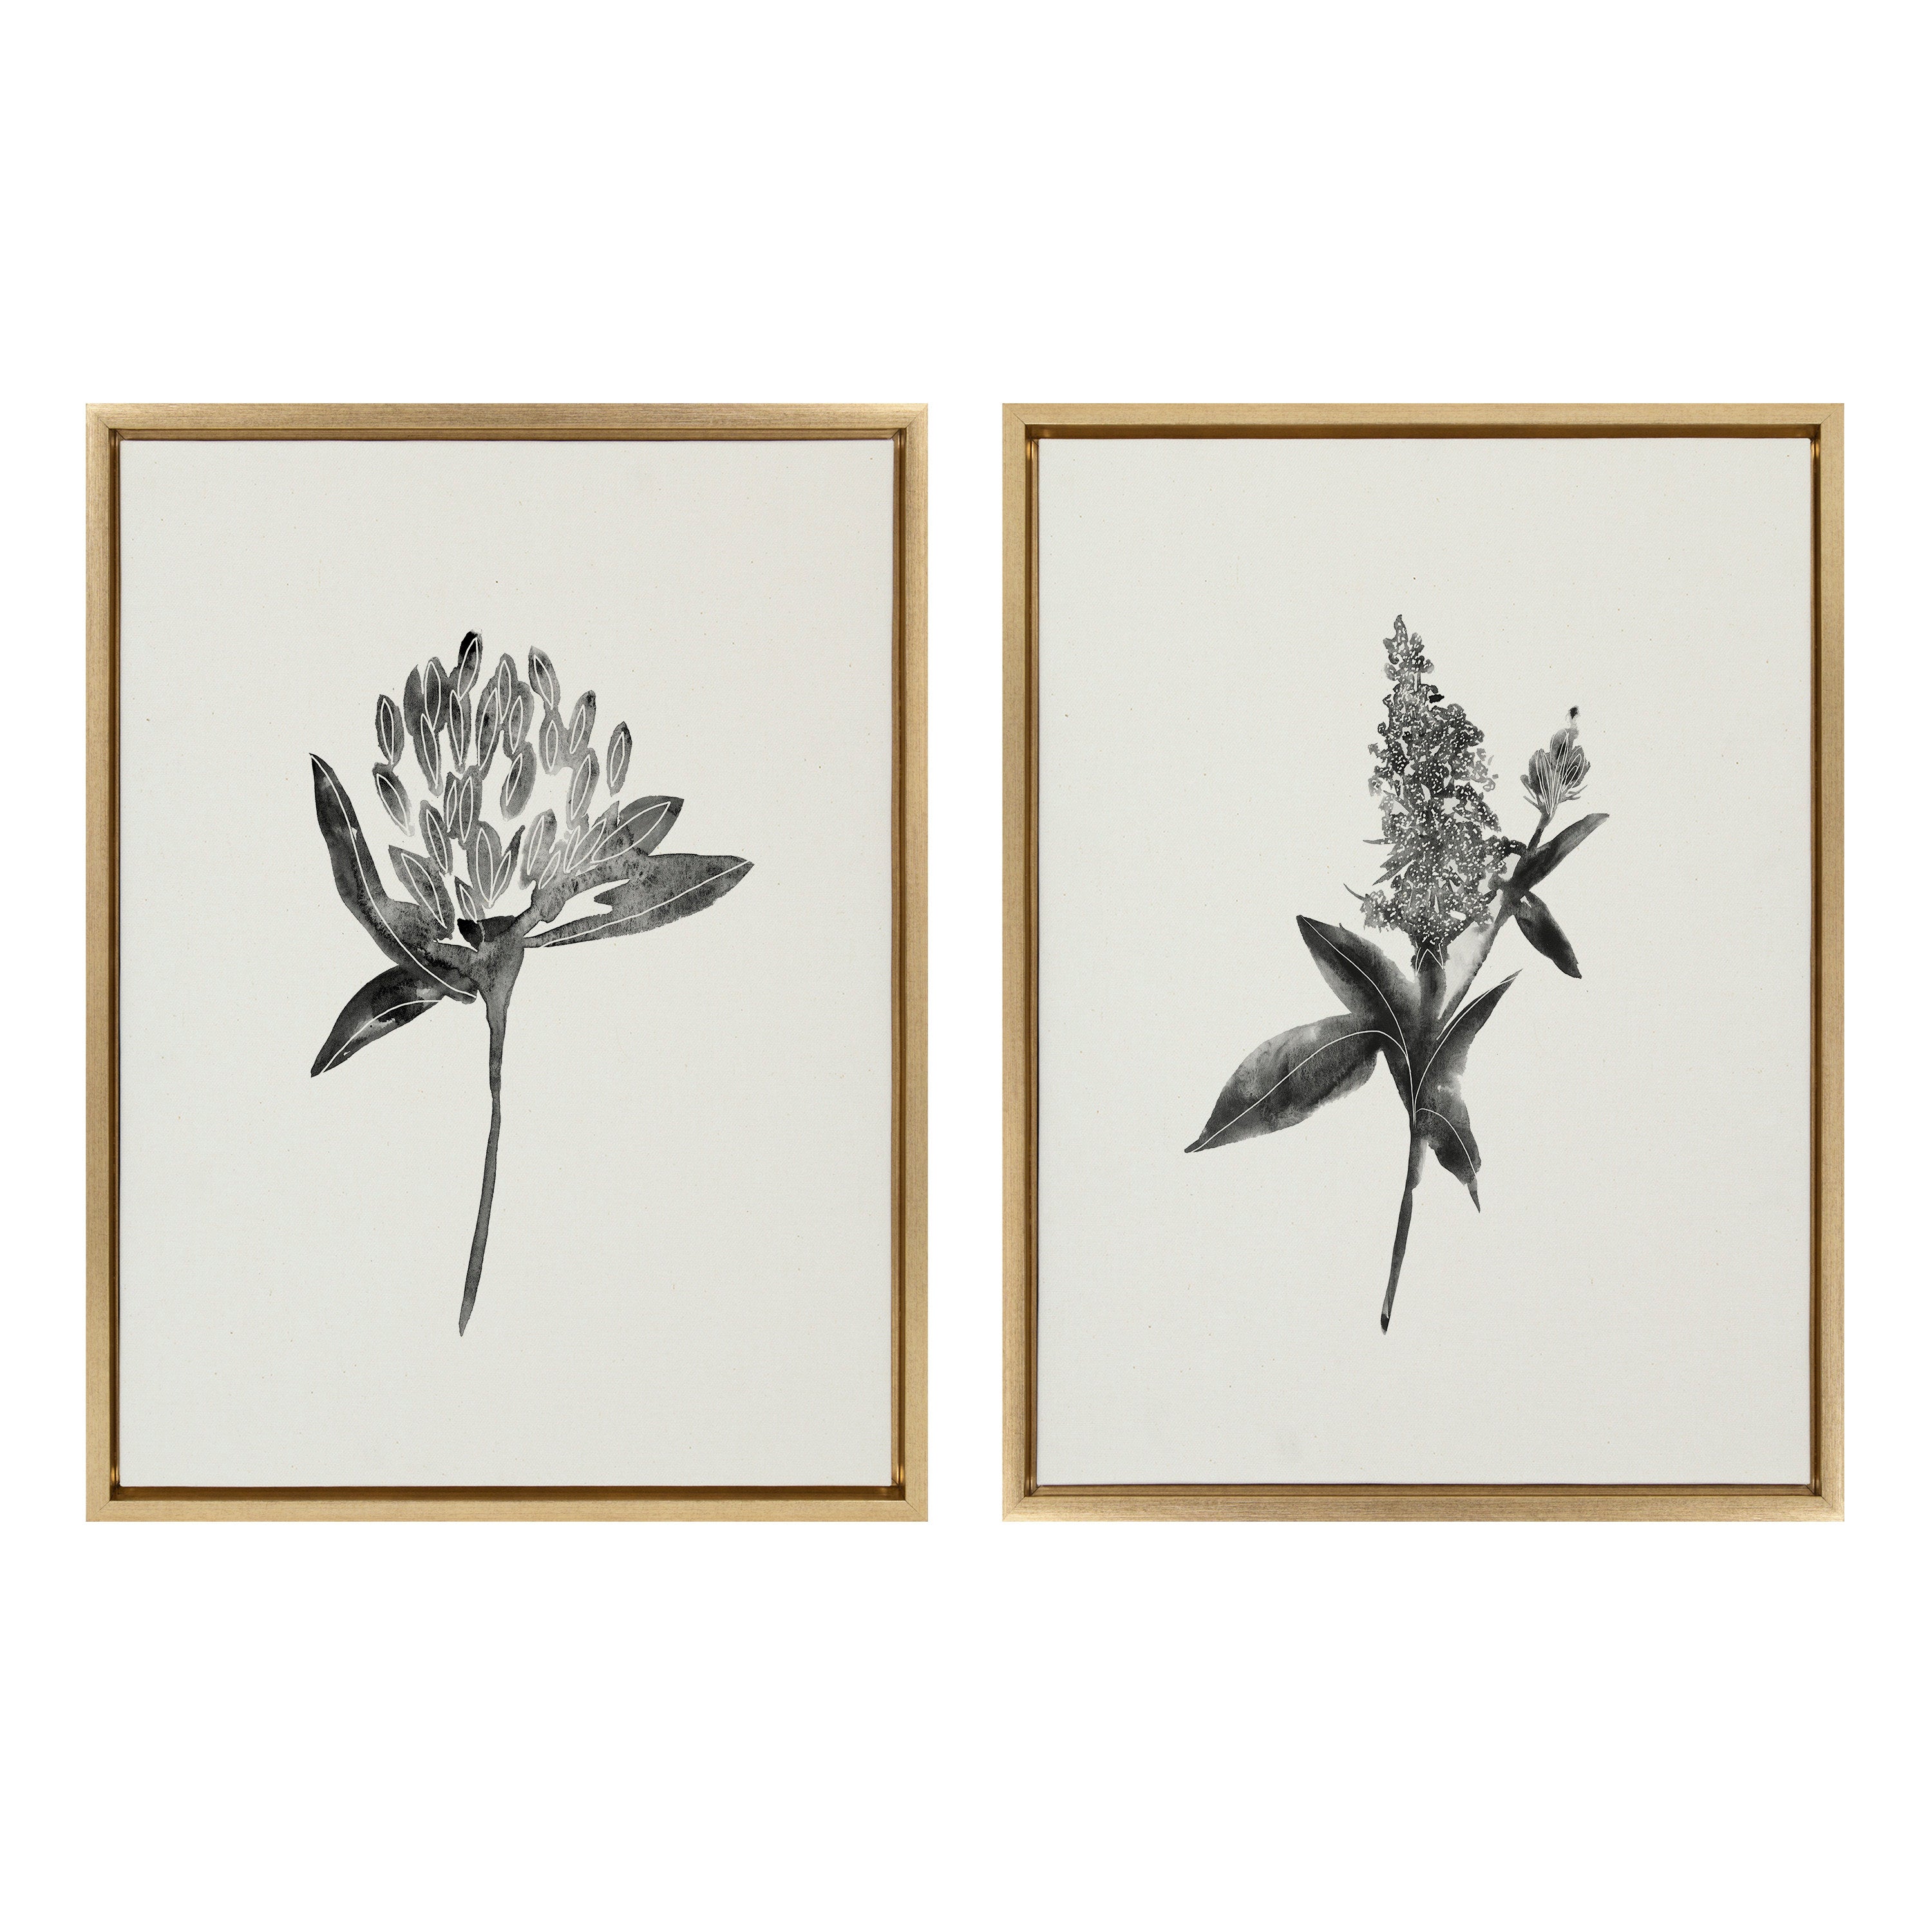 Sylvie Vintage Botanical 1 and 2 Framed Canvas by Teju Reval of SnazzyHues